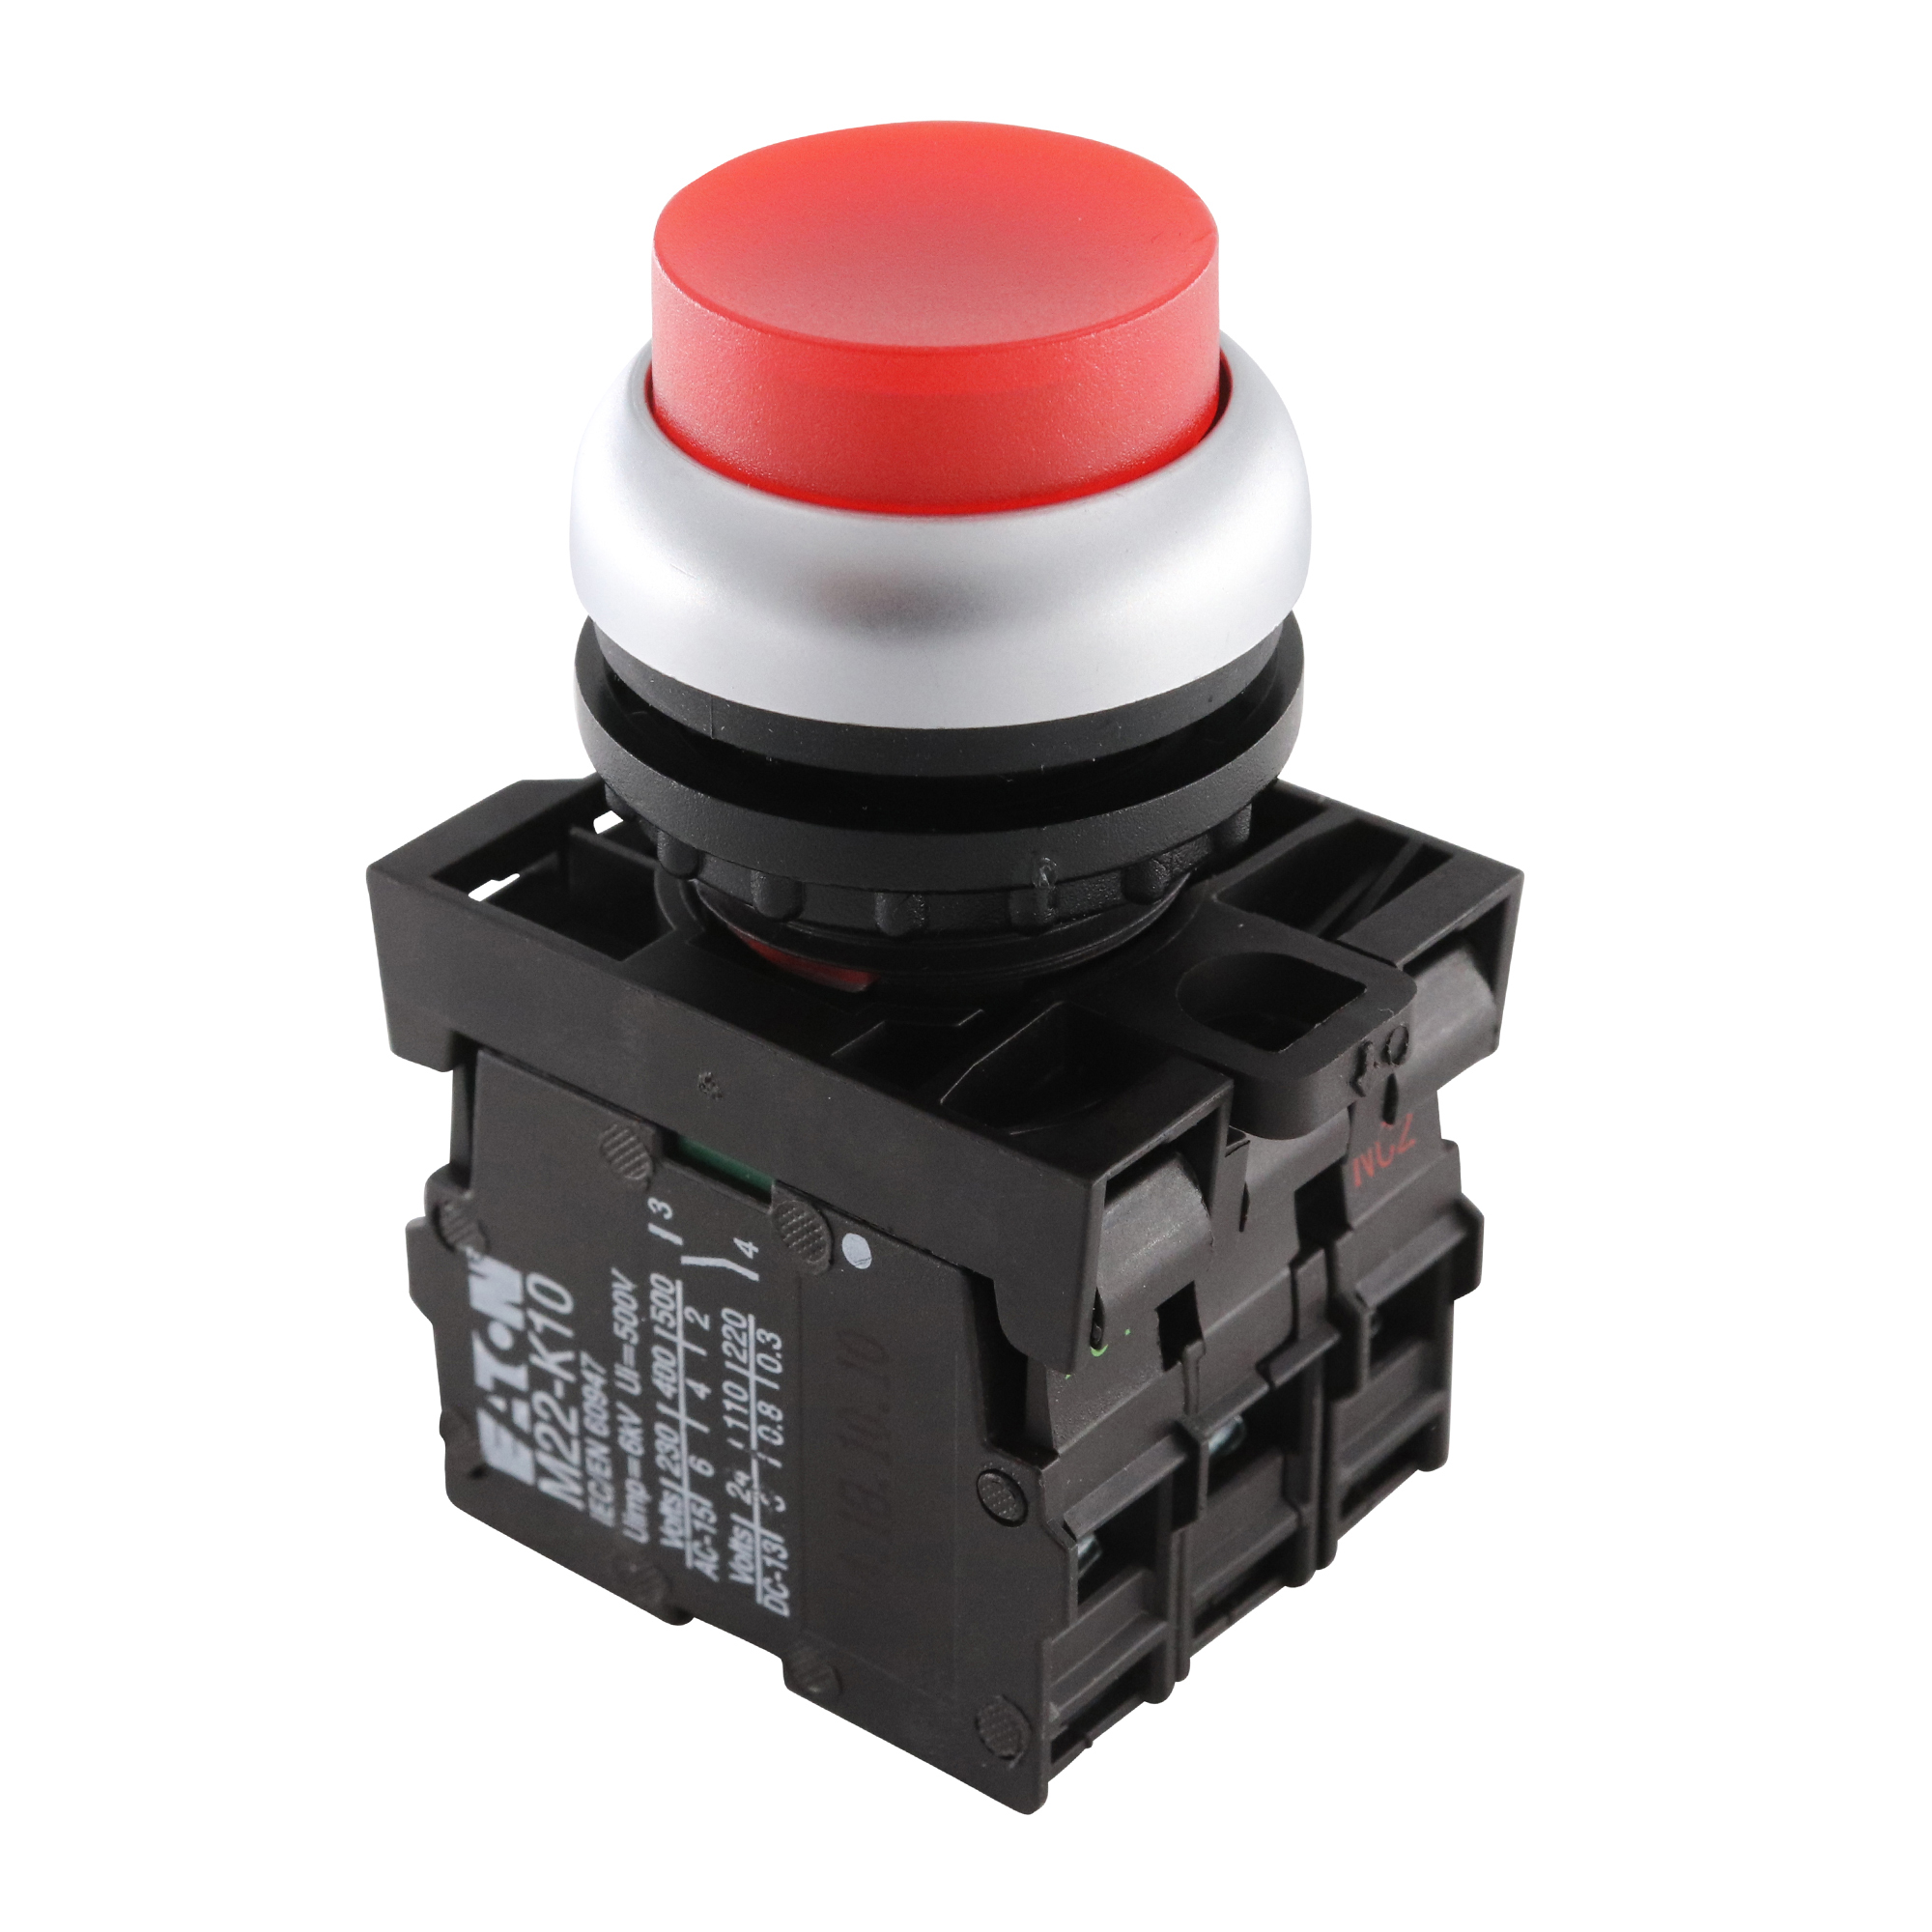 EATON MOELLER M22-DLH-R/K11/R Industrial Pushbutton Switch, Momentary Spring Return, Red, M22 Series, Round, SPST-NC, SPST-NO - image 1 of 4